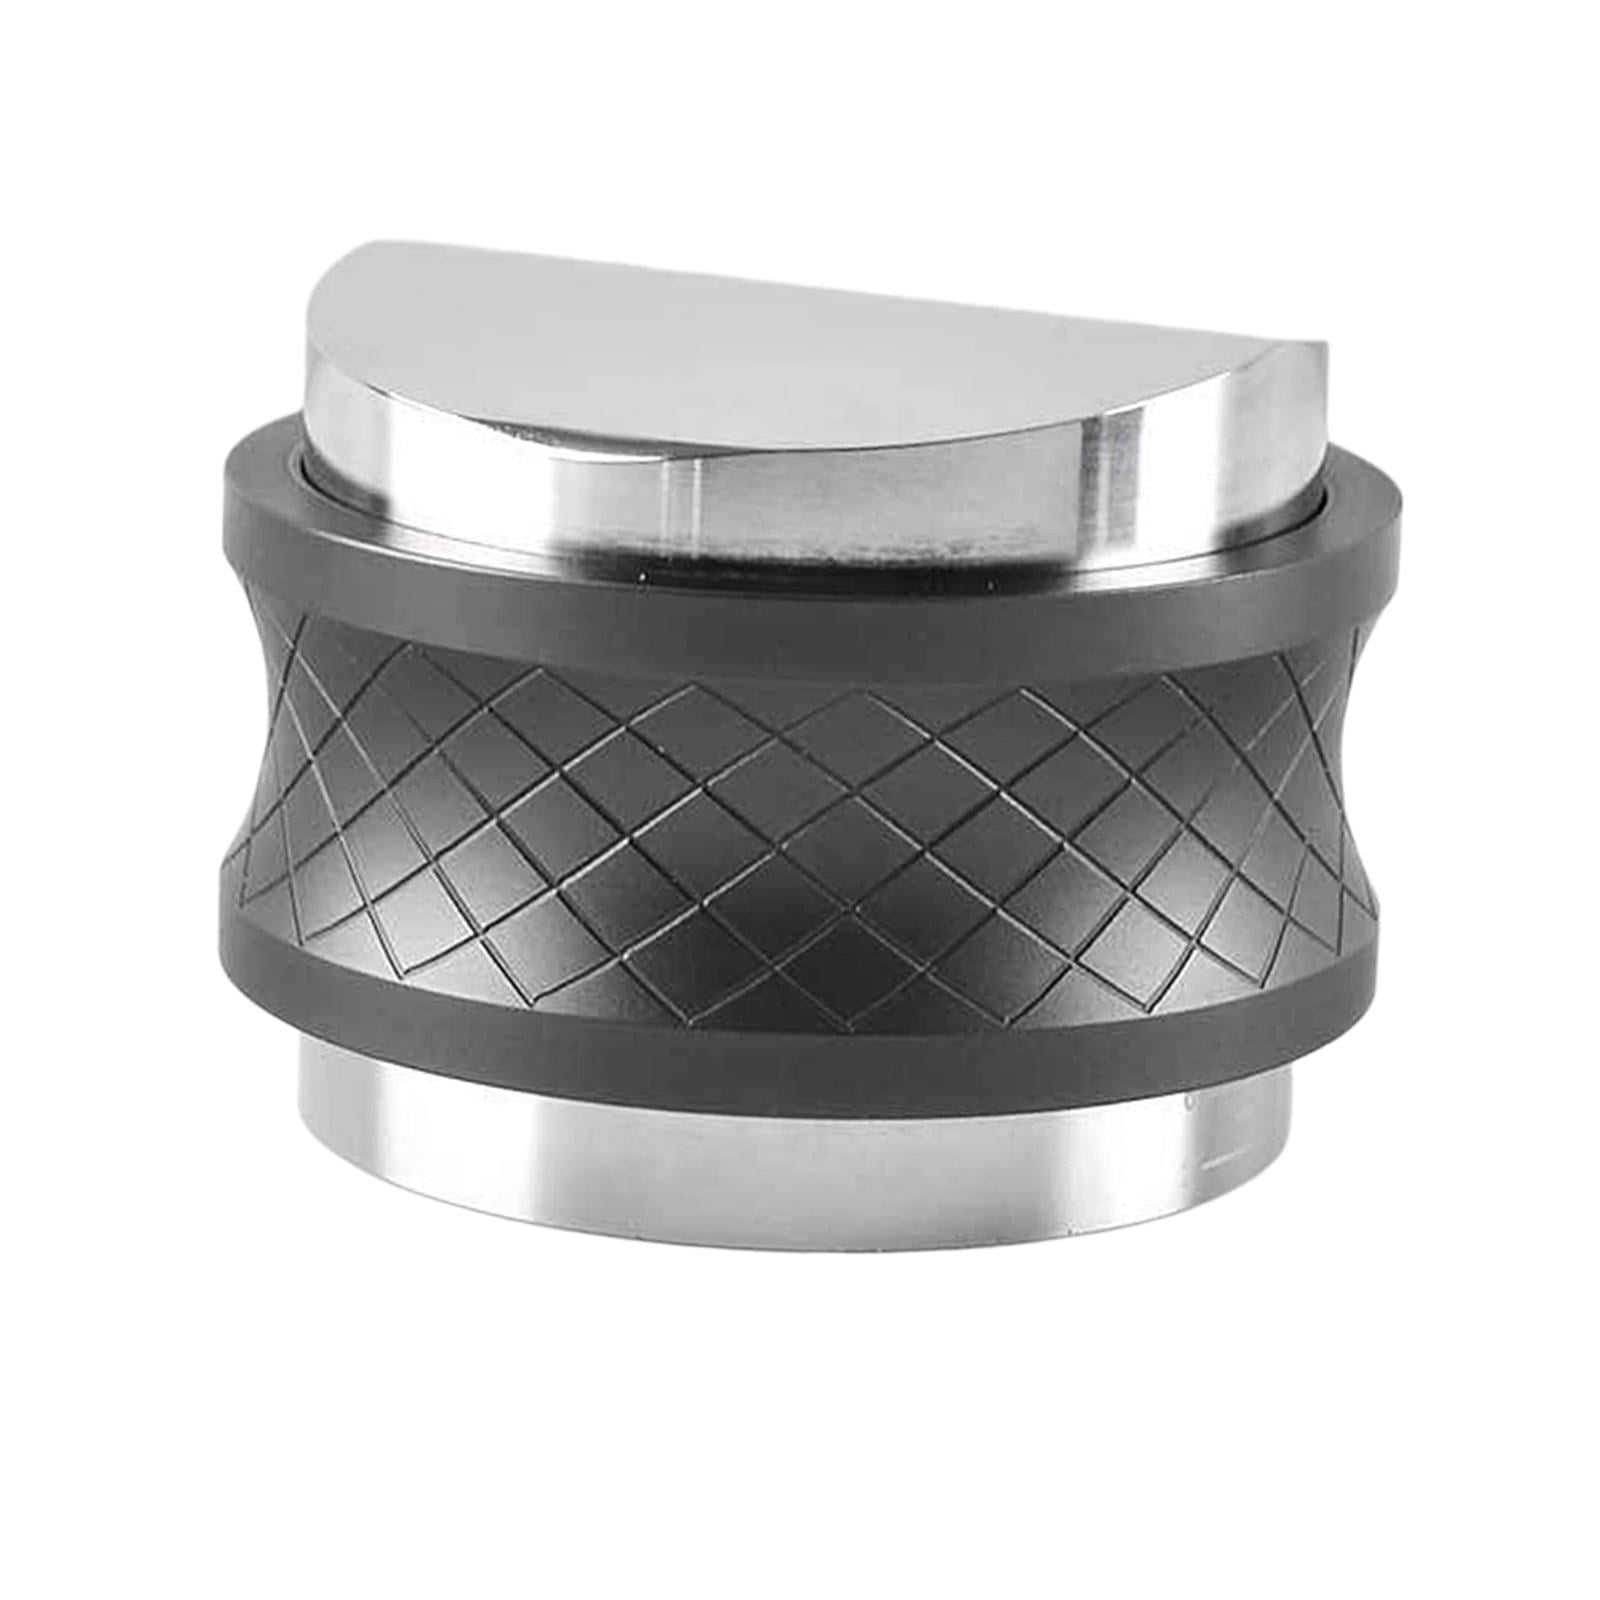 Details about   1x Coffee Tamper Base Stand Stainless Steel Powder Seat Cushion Holder Rack Tool 